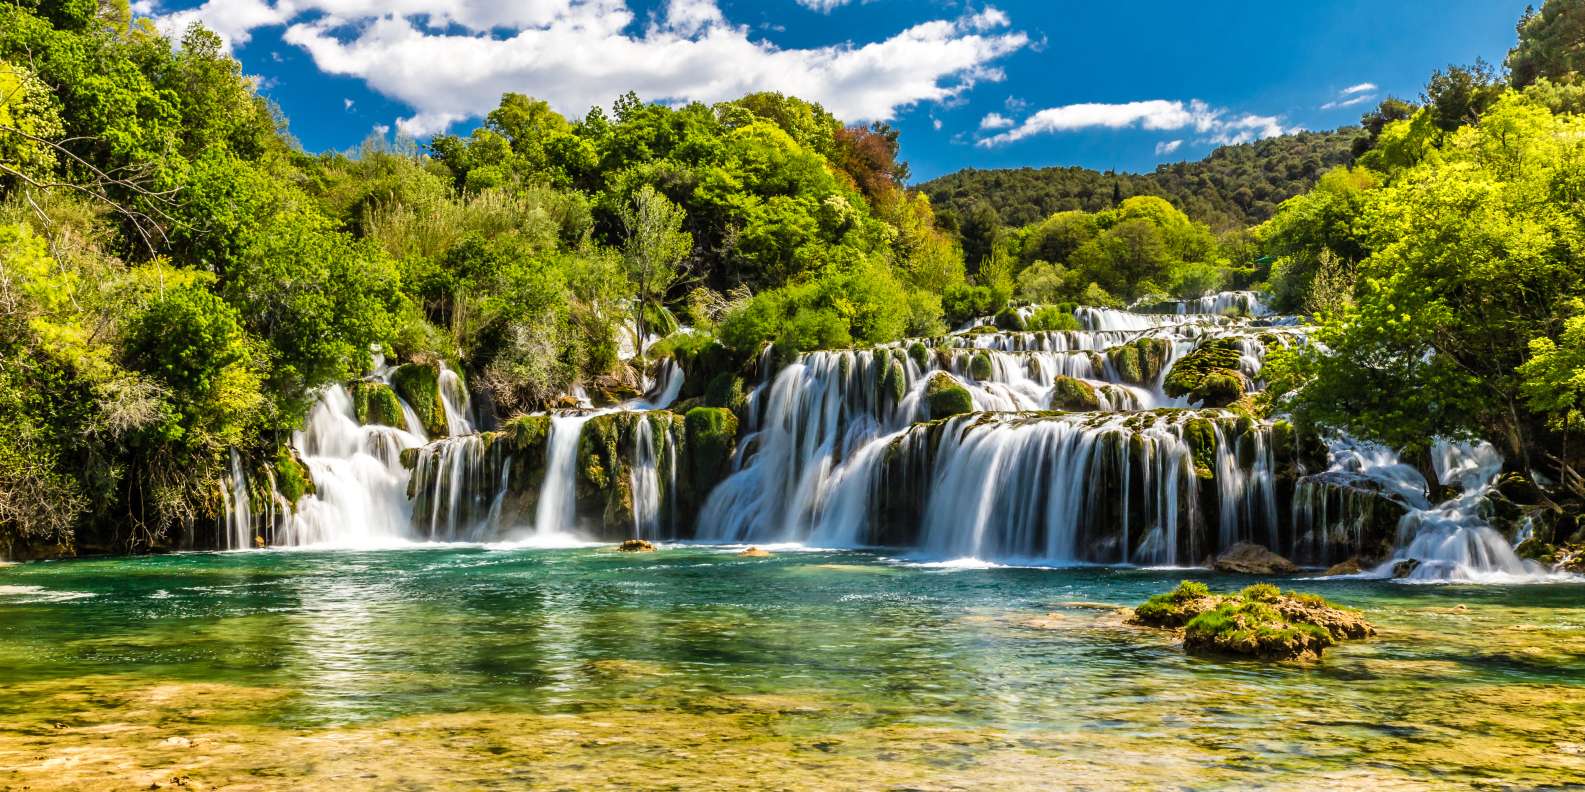 The BEST Croatia Nature adventure 2023 FREE Cancellation GetYourGuide